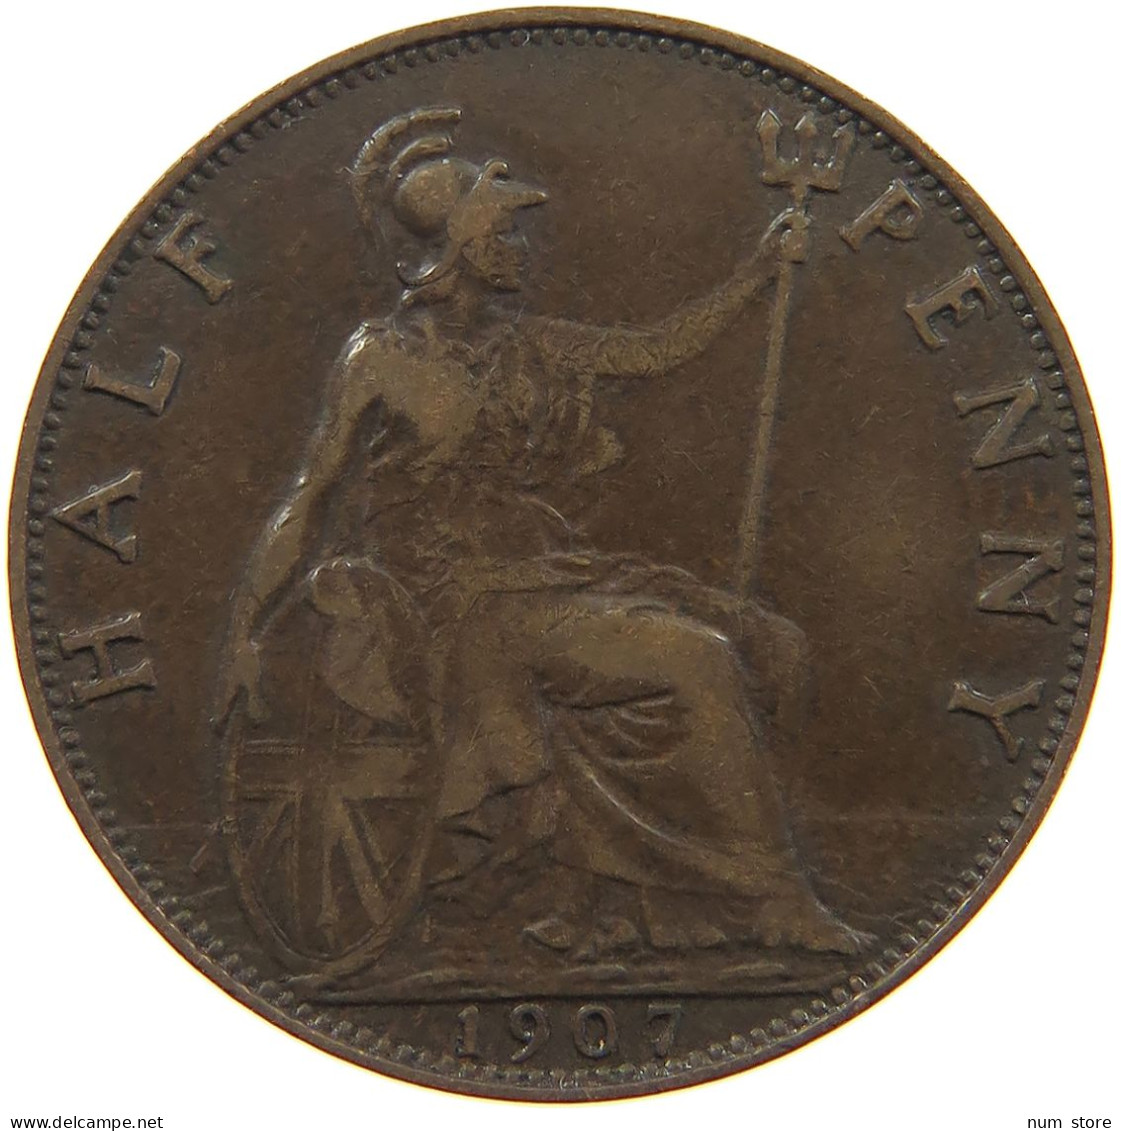 GREAT BRITAIN HALFPENNY 1907 #a042 0257 - C. 1/2 Penny